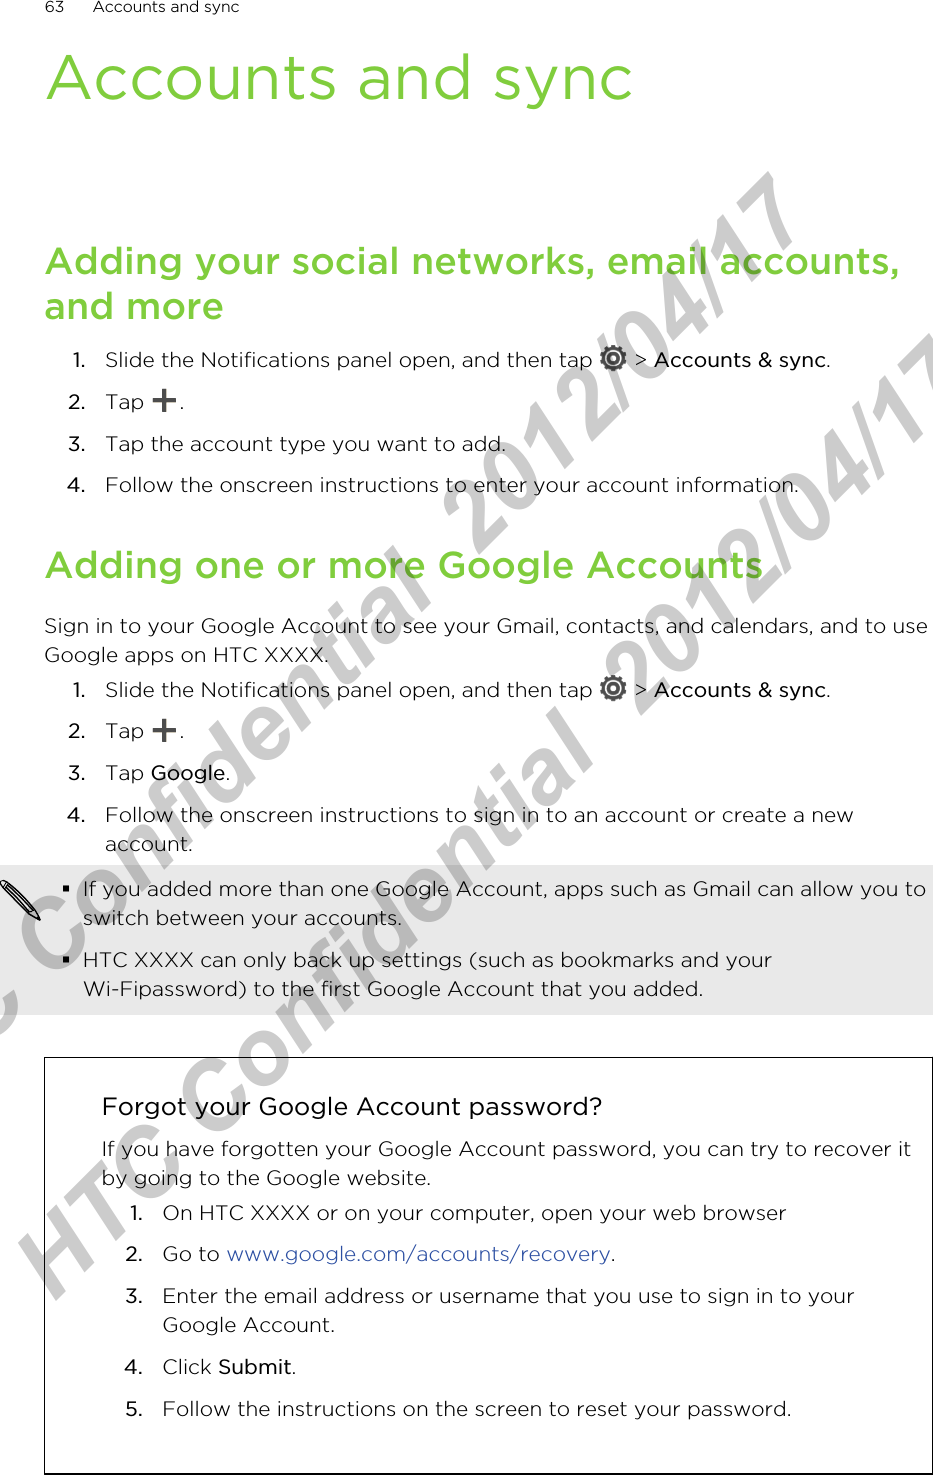 Accounts and syncAdding your social networks, email accounts,and more1. Slide the Notifications panel open, and then tap   &gt; Accounts &amp; sync.2. Tap  .3. Tap the account type you want to add.4. Follow the onscreen instructions to enter your account information.Adding one or more Google AccountsSign in to your Google Account to see your Gmail, contacts, and calendars, and to useGoogle apps on HTC XXXX.1. Slide the Notifications panel open, and then tap   &gt; Accounts &amp; sync.2. Tap  .3. Tap Google.4. Follow the onscreen instructions to sign in to an account or create a newaccount.§If you added more than one Google Account, apps such as Gmail can allow you toswitch between your accounts.§HTC XXXX can only back up settings (such as bookmarks and yourWi-Fipassword) to the first Google Account that you added.Forgot your Google Account password?If you have forgotten your Google Account password, you can try to recover itby going to the Google website.1. On HTC XXXX or on your computer, open your web browser2. Go to www.google.com/accounts/recovery.3. Enter the email address or username that you use to sign in to yourGoogle Account.4. Click Submit.5. Follow the instructions on the screen to reset your password.63 Accounts and syncHTC Confidential  2012/04/17  HTC Confidential  2012/04/17 